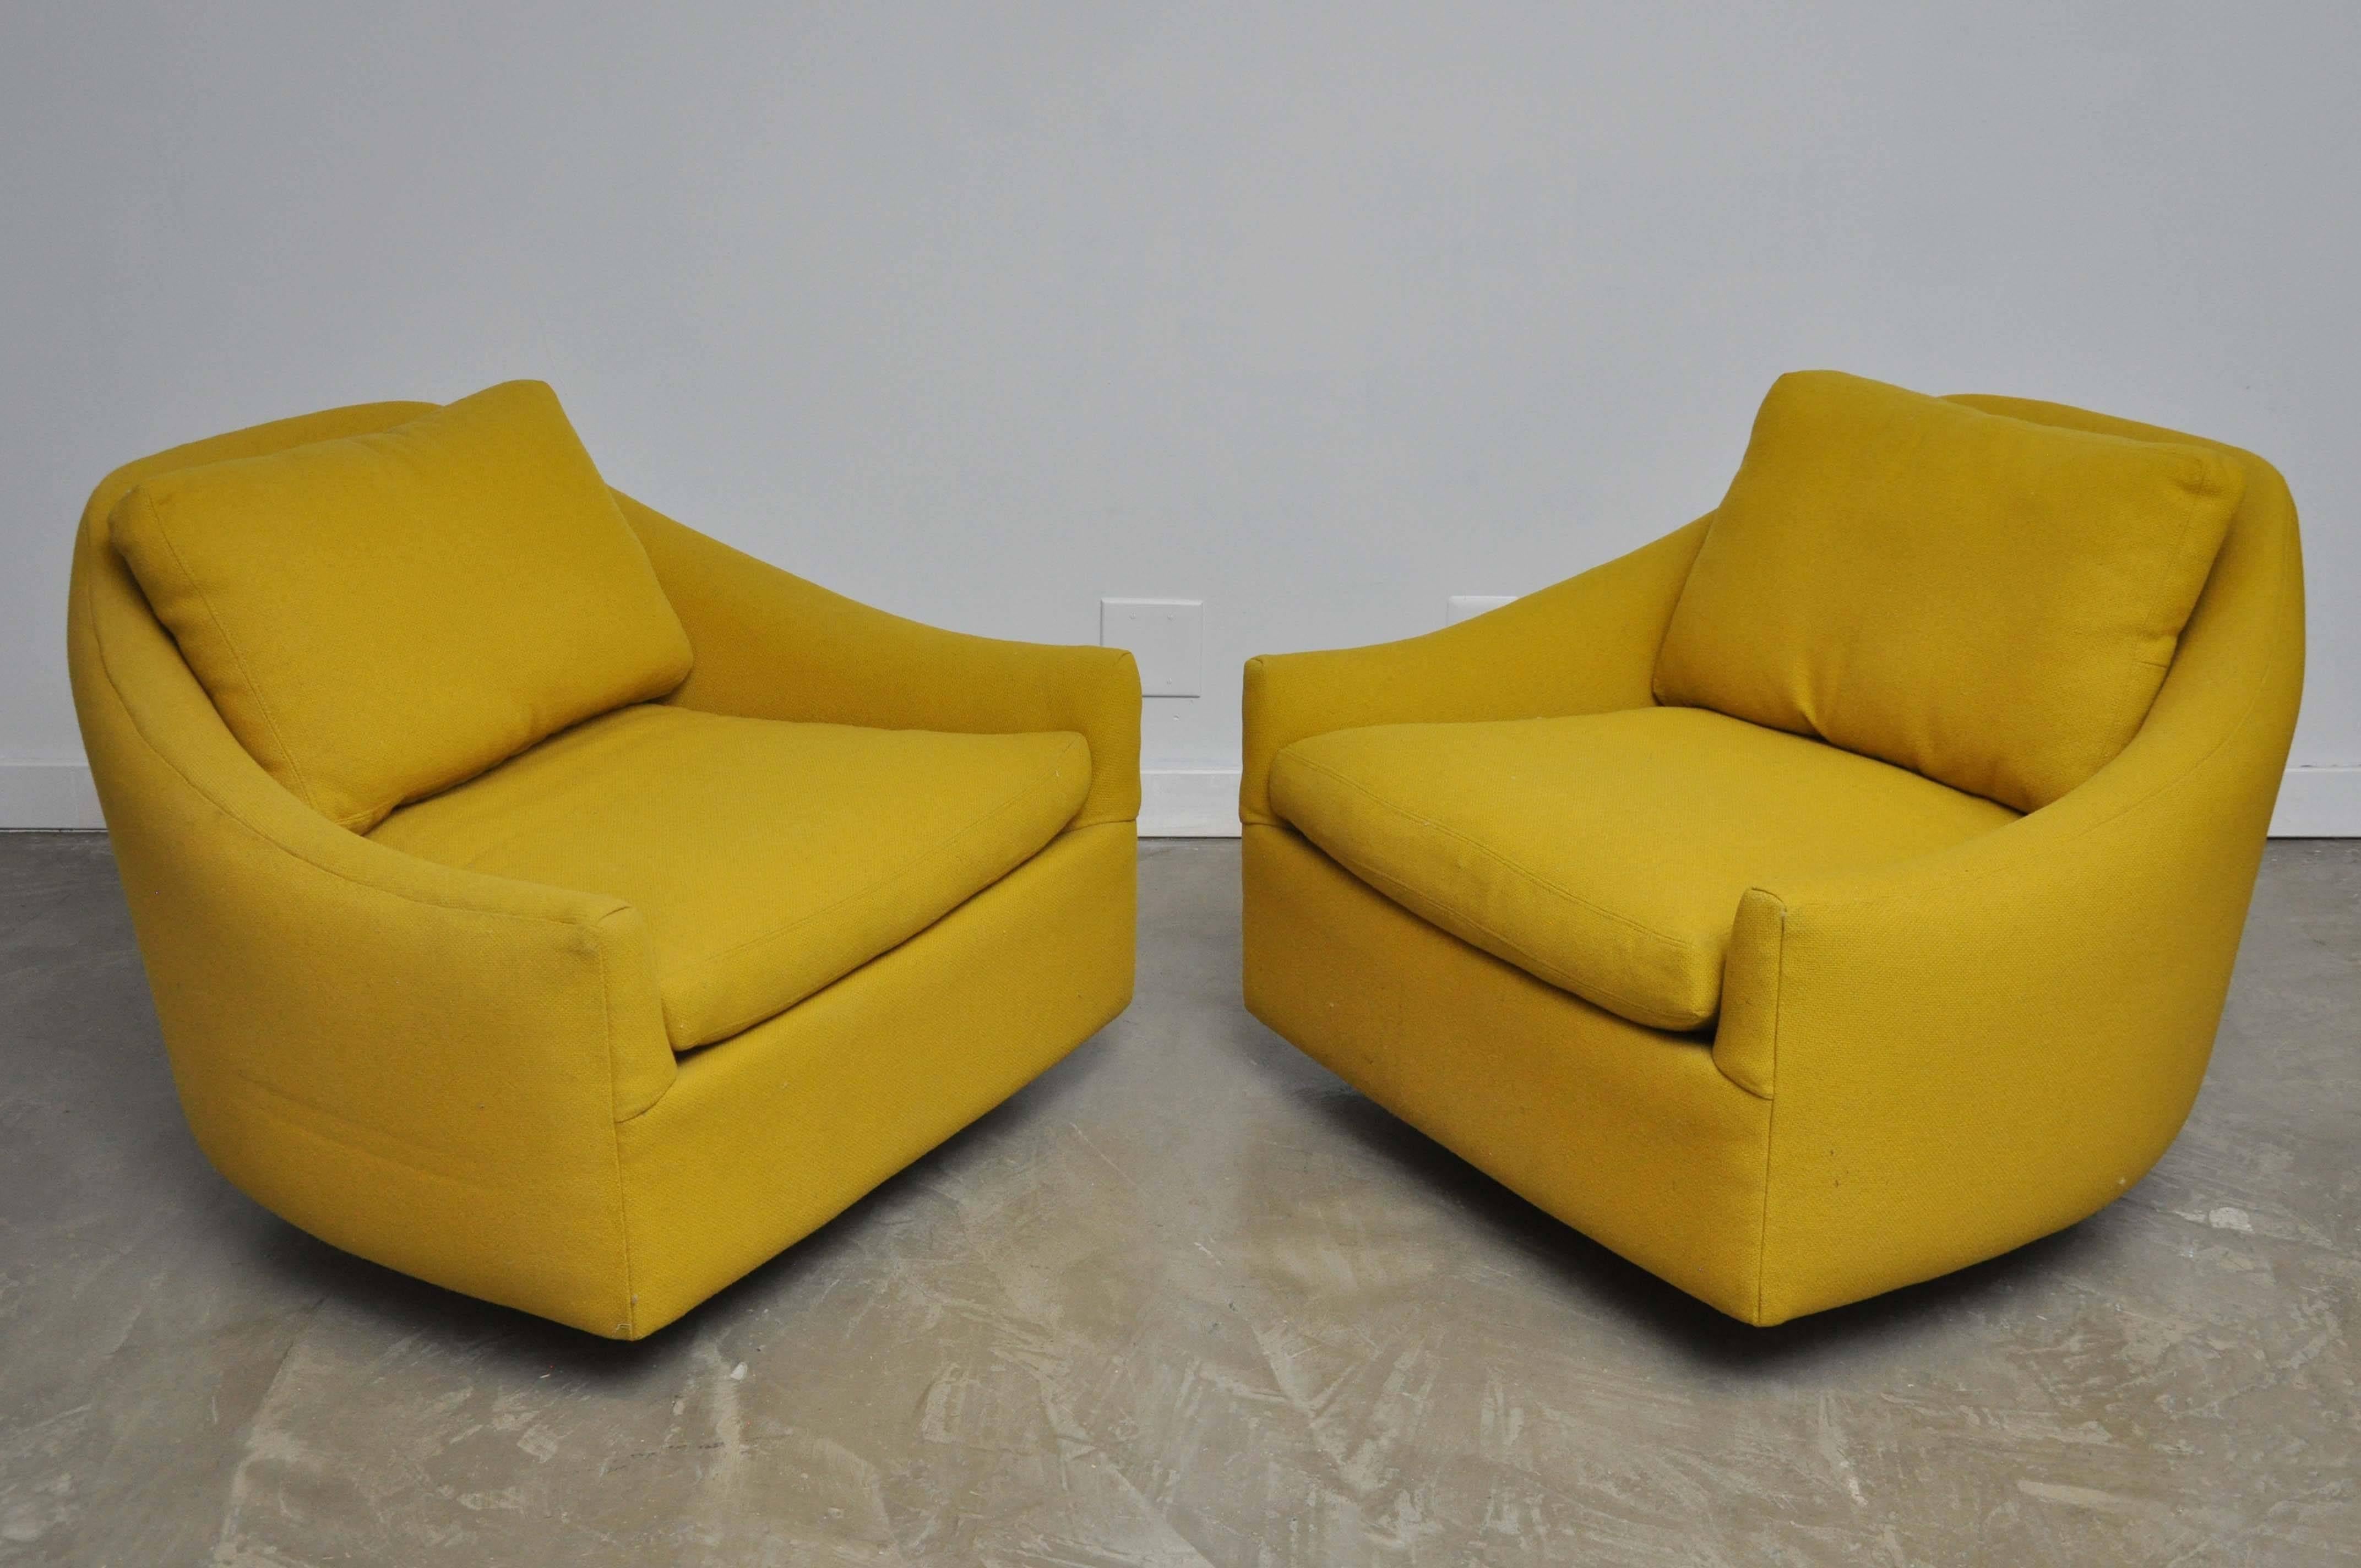 Pair of swivel chairs by Milo Baughman. Original wool upholstery over refinished walnut bases.